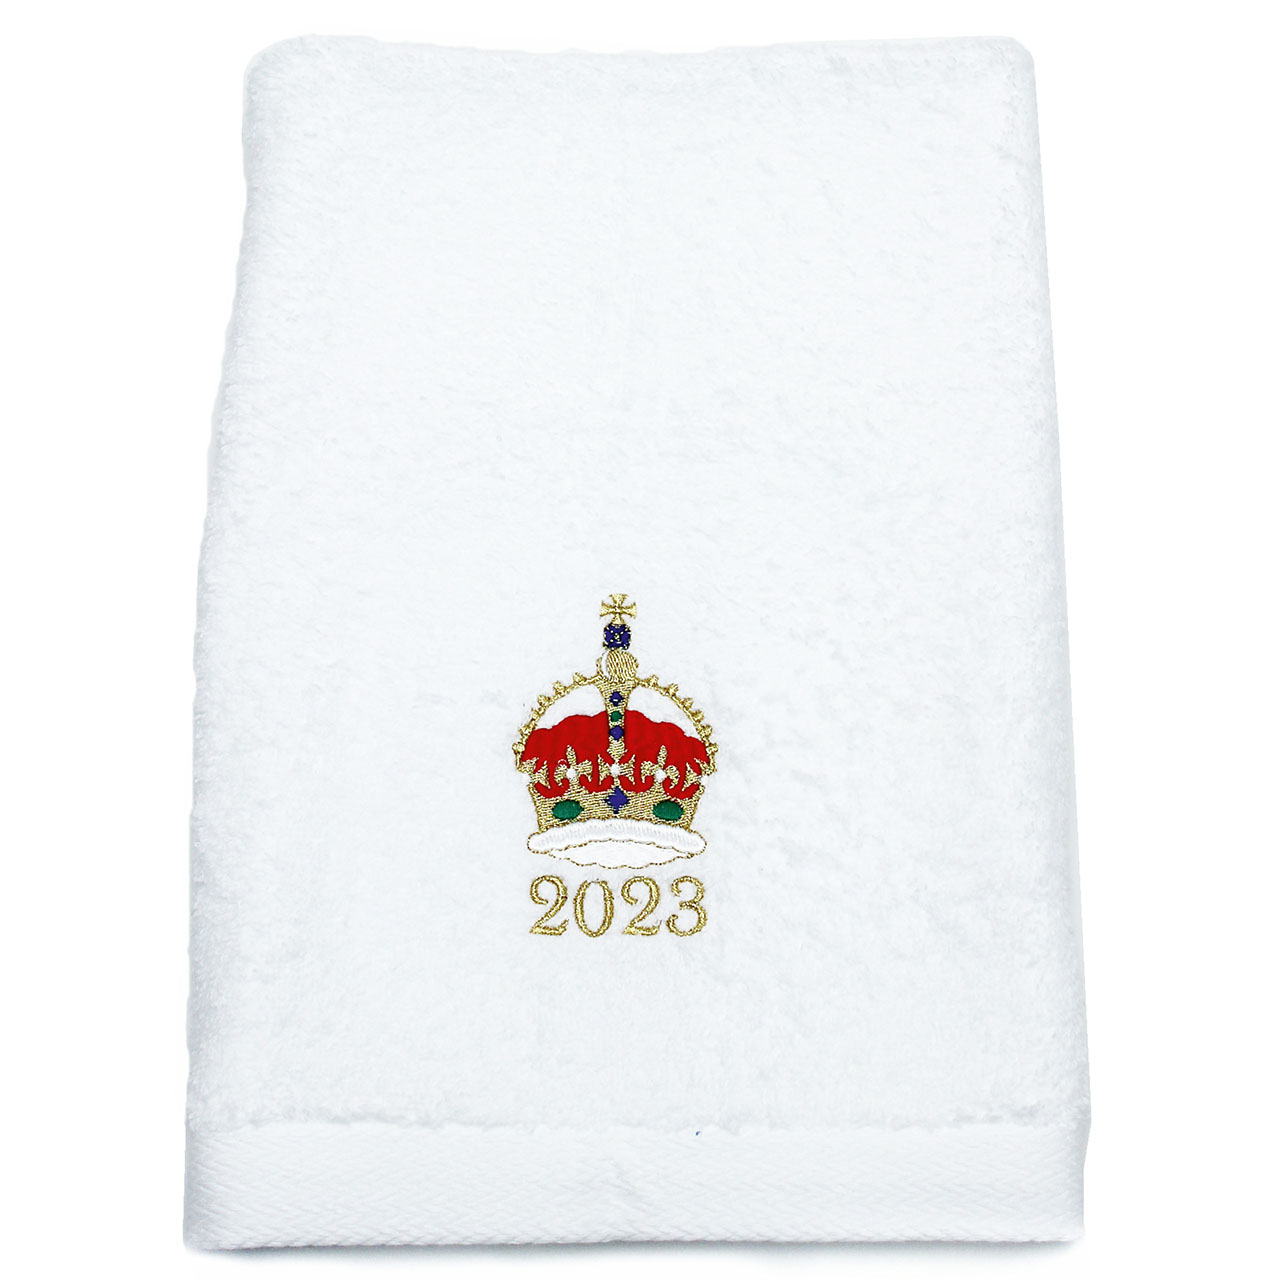 Coronation Hand Towels - Pack of 2